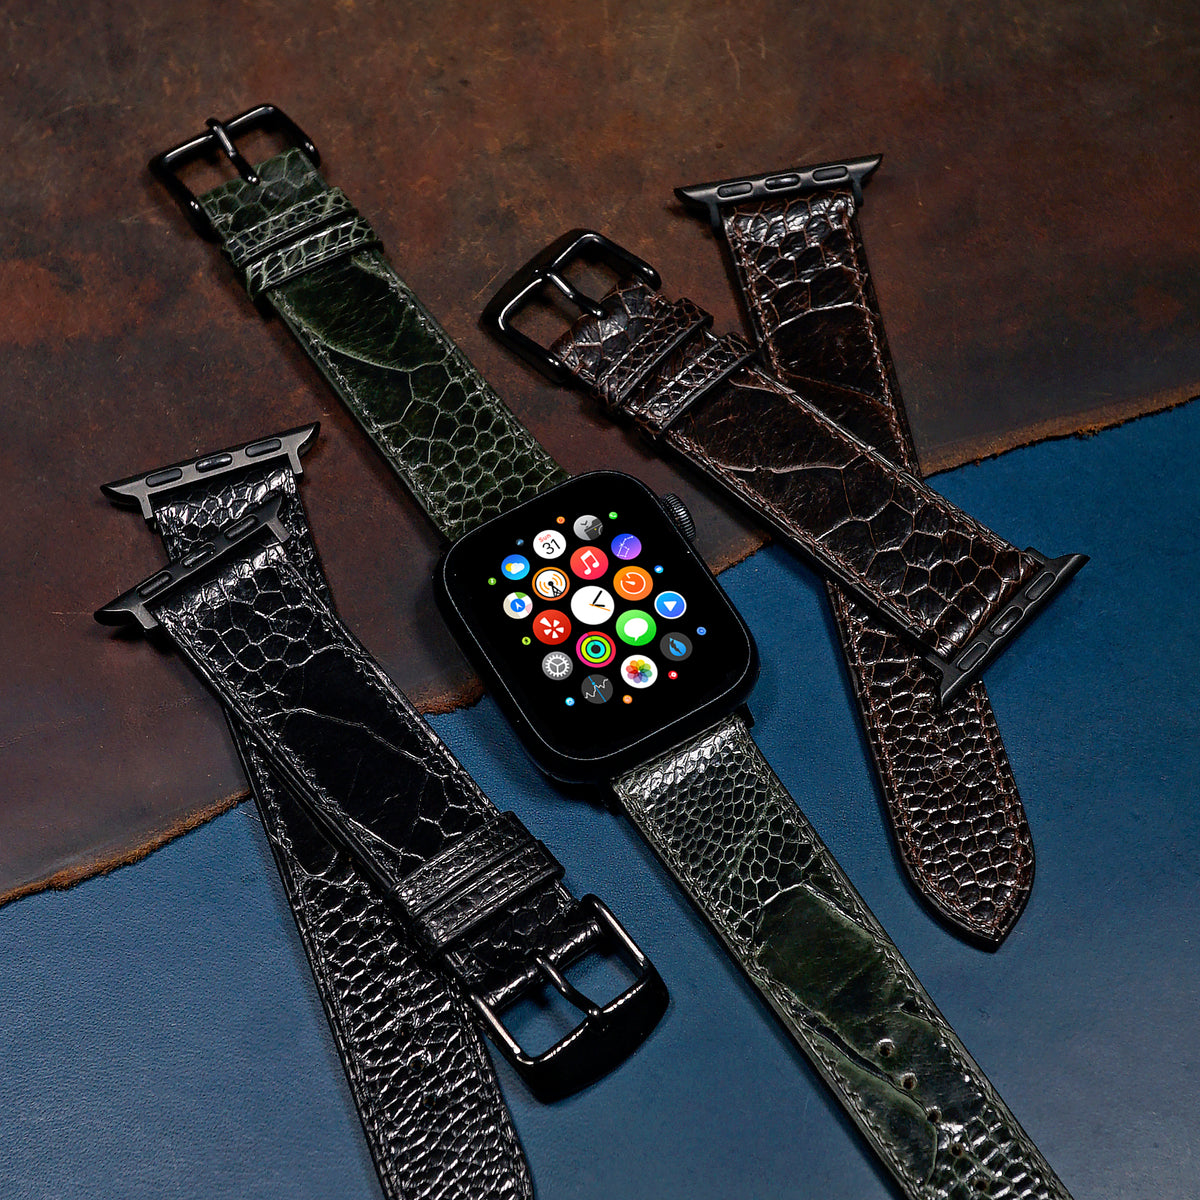 Ostrich Leather Watch Strap in Olive (Apple Watch) - Nomad Watch Works MY